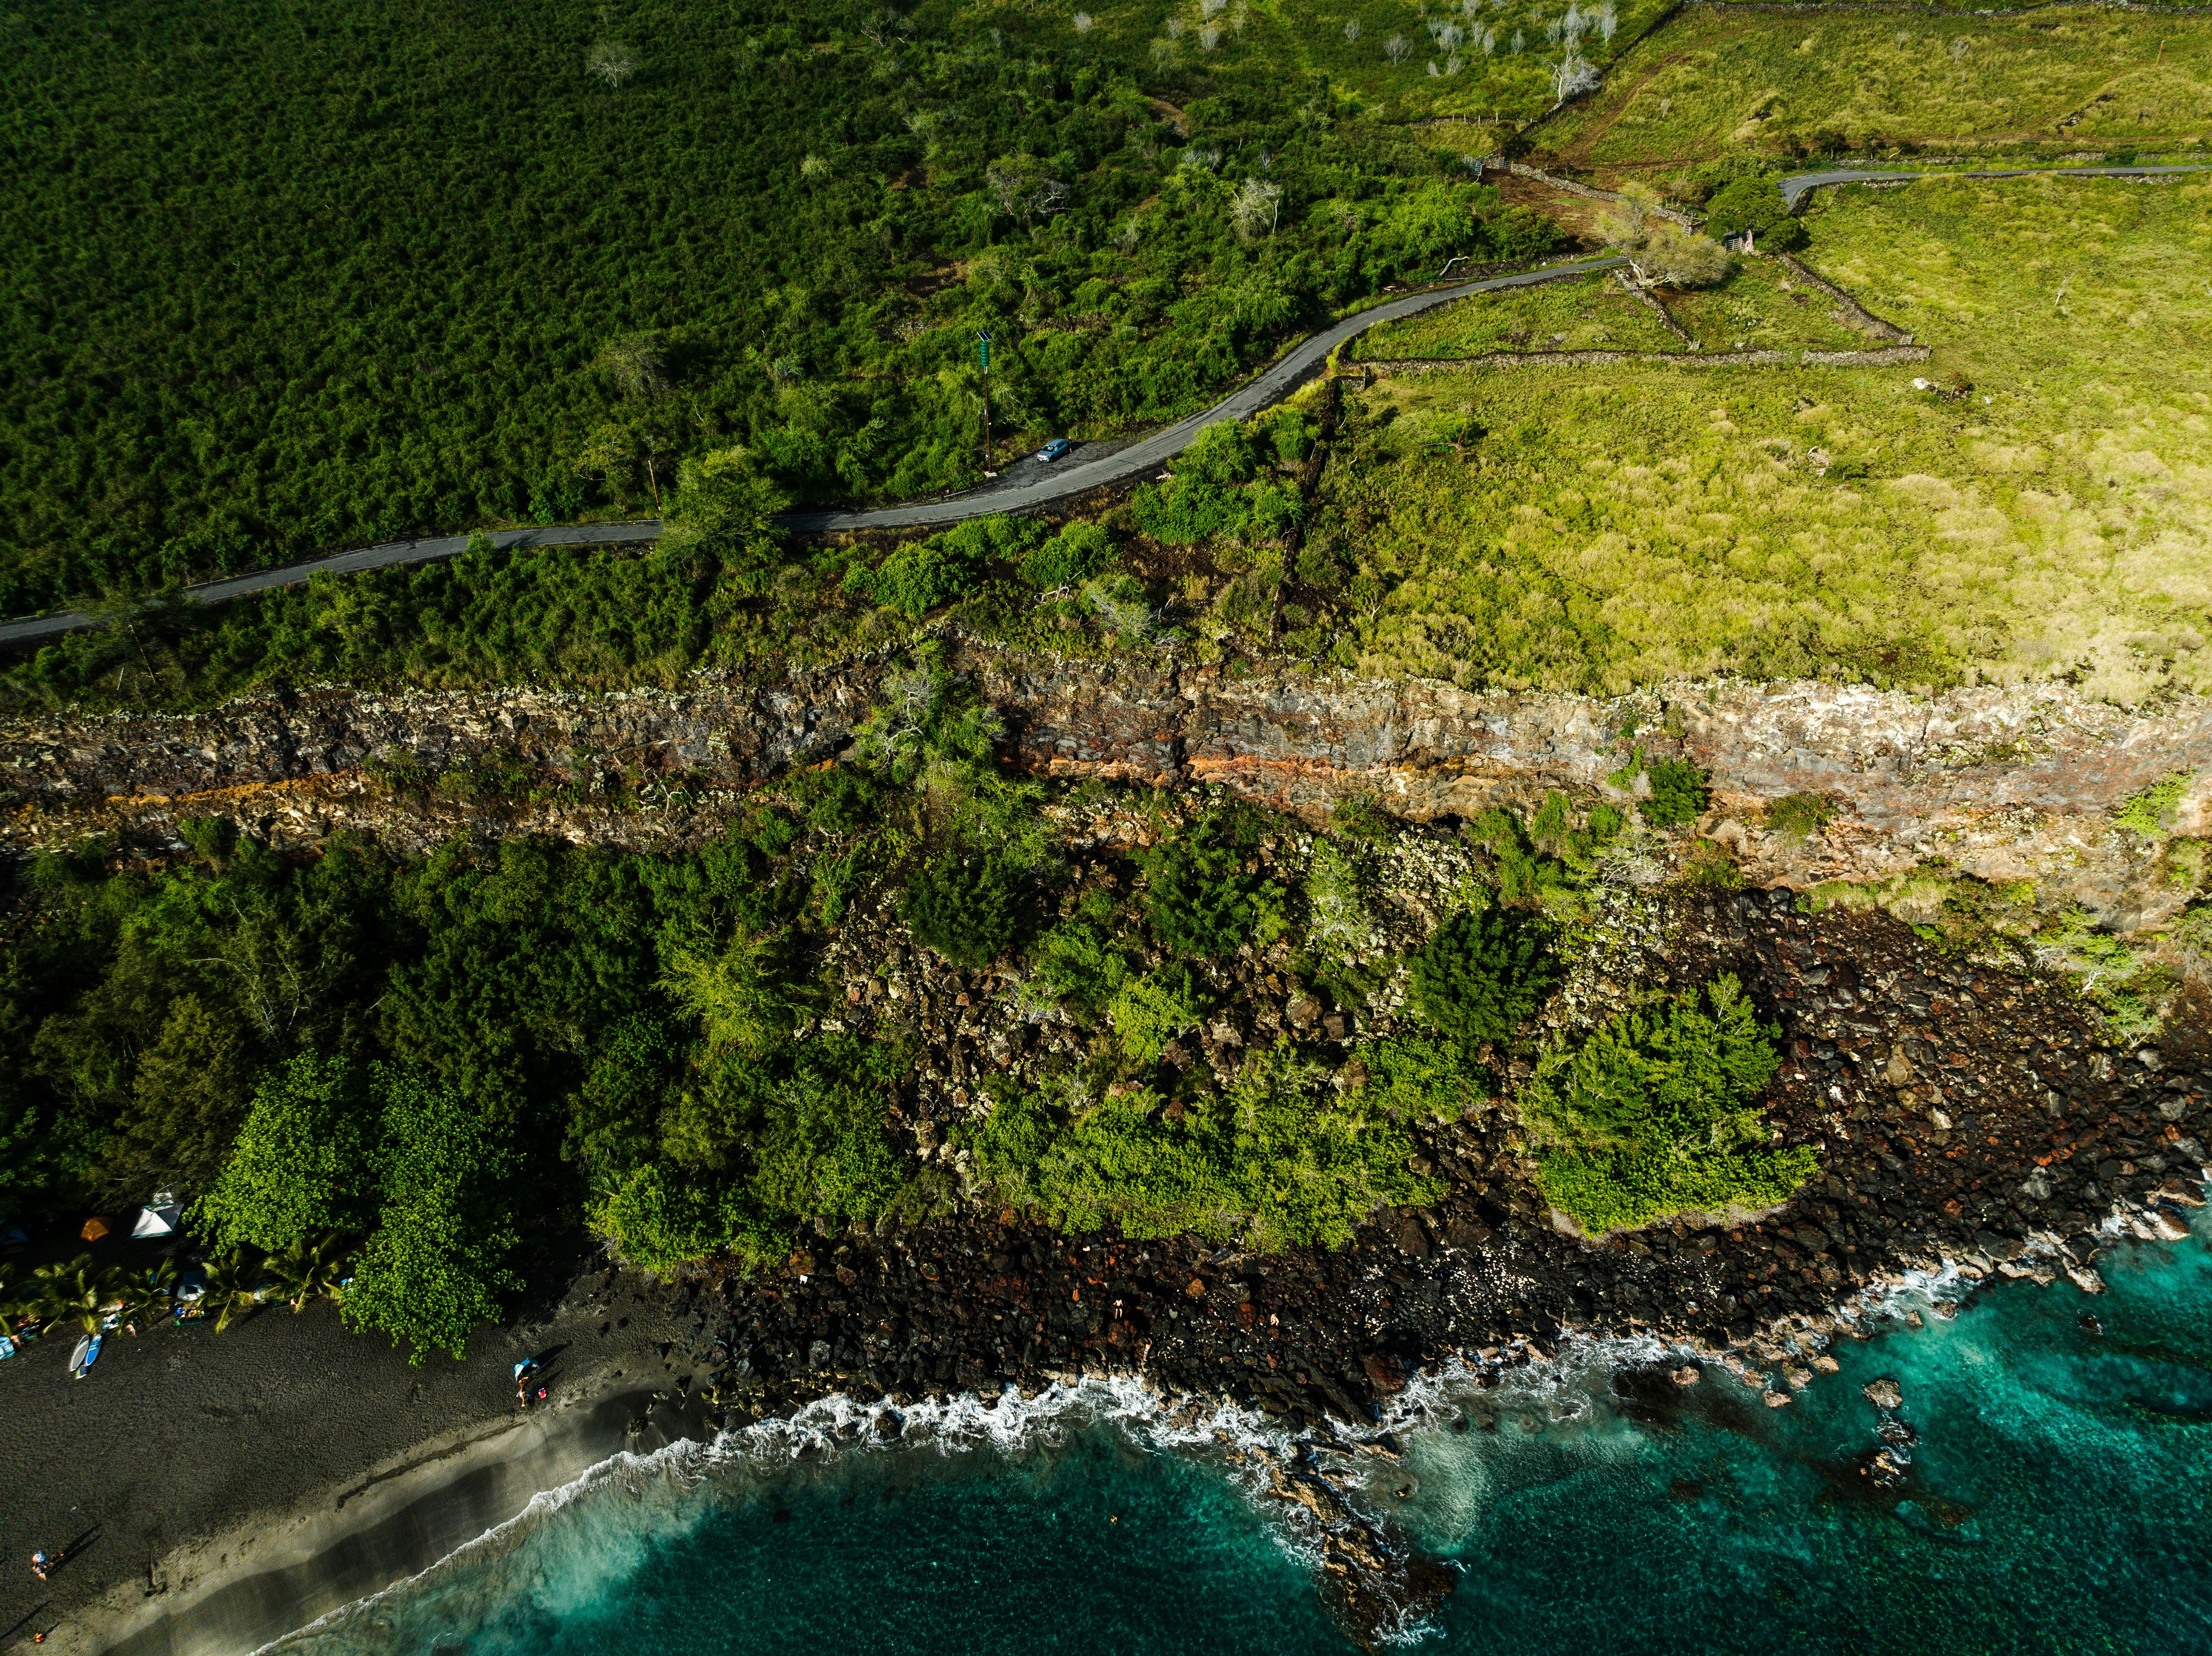 A winding road along a lush green Hawaiian landscape and along jewel toned teal waters